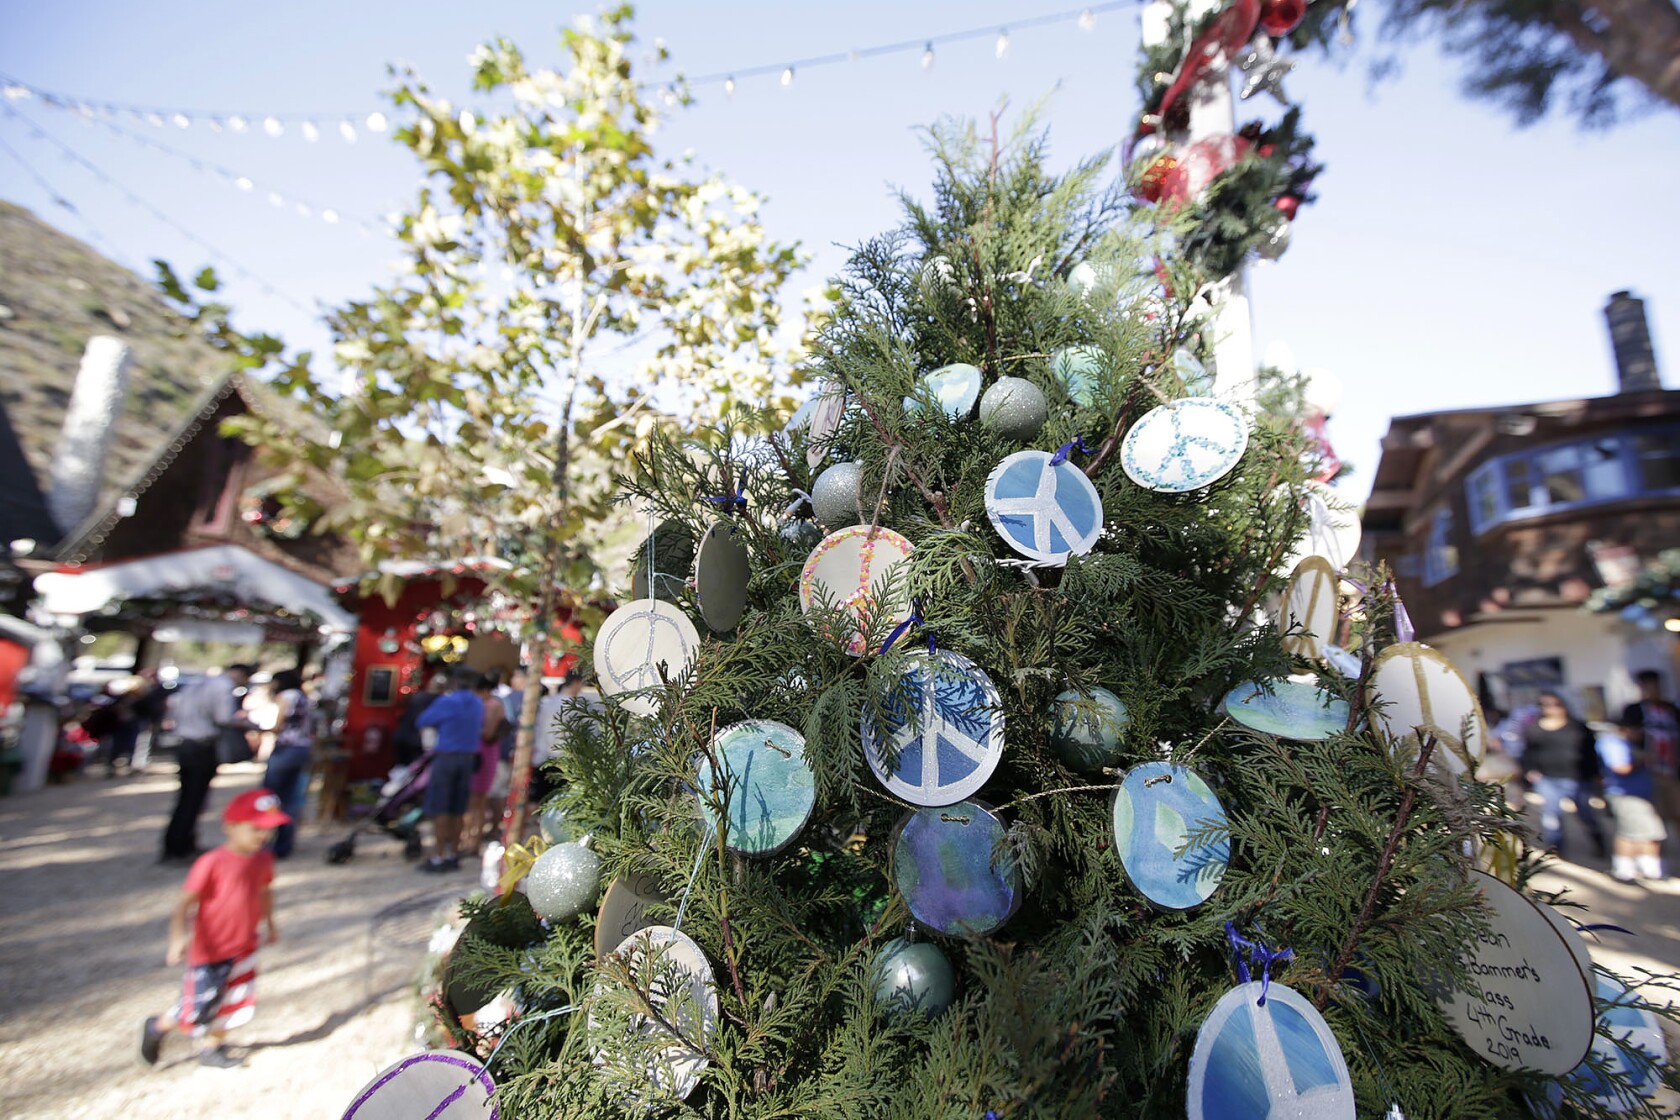 It's a winter wonderland at the Sawdust Festival grounds in Laguna